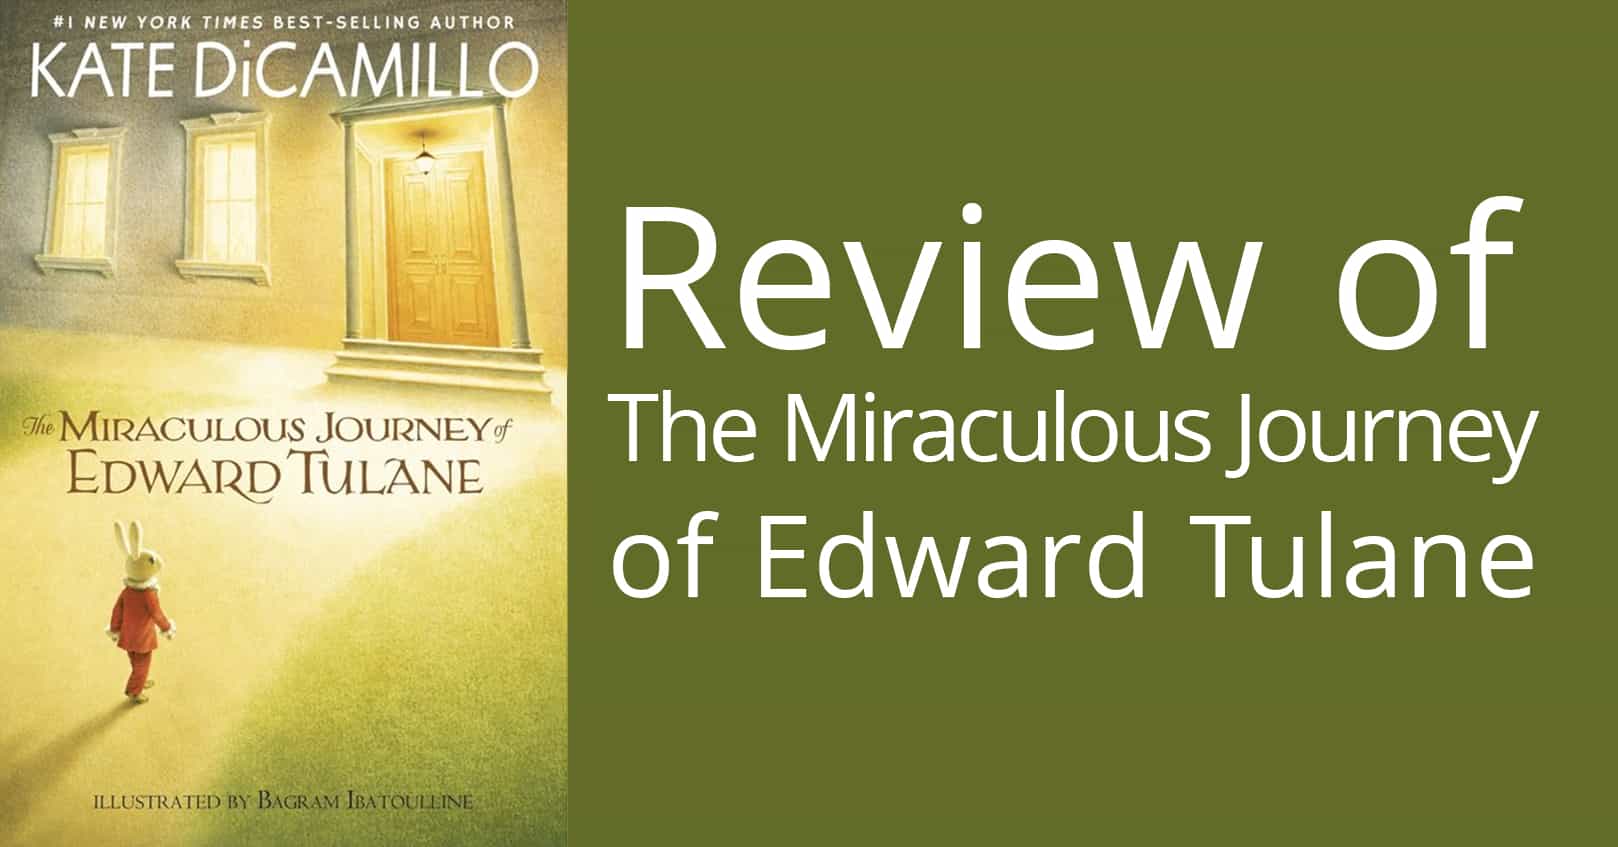 Review of The Miraculous Journey of Edward Tulane